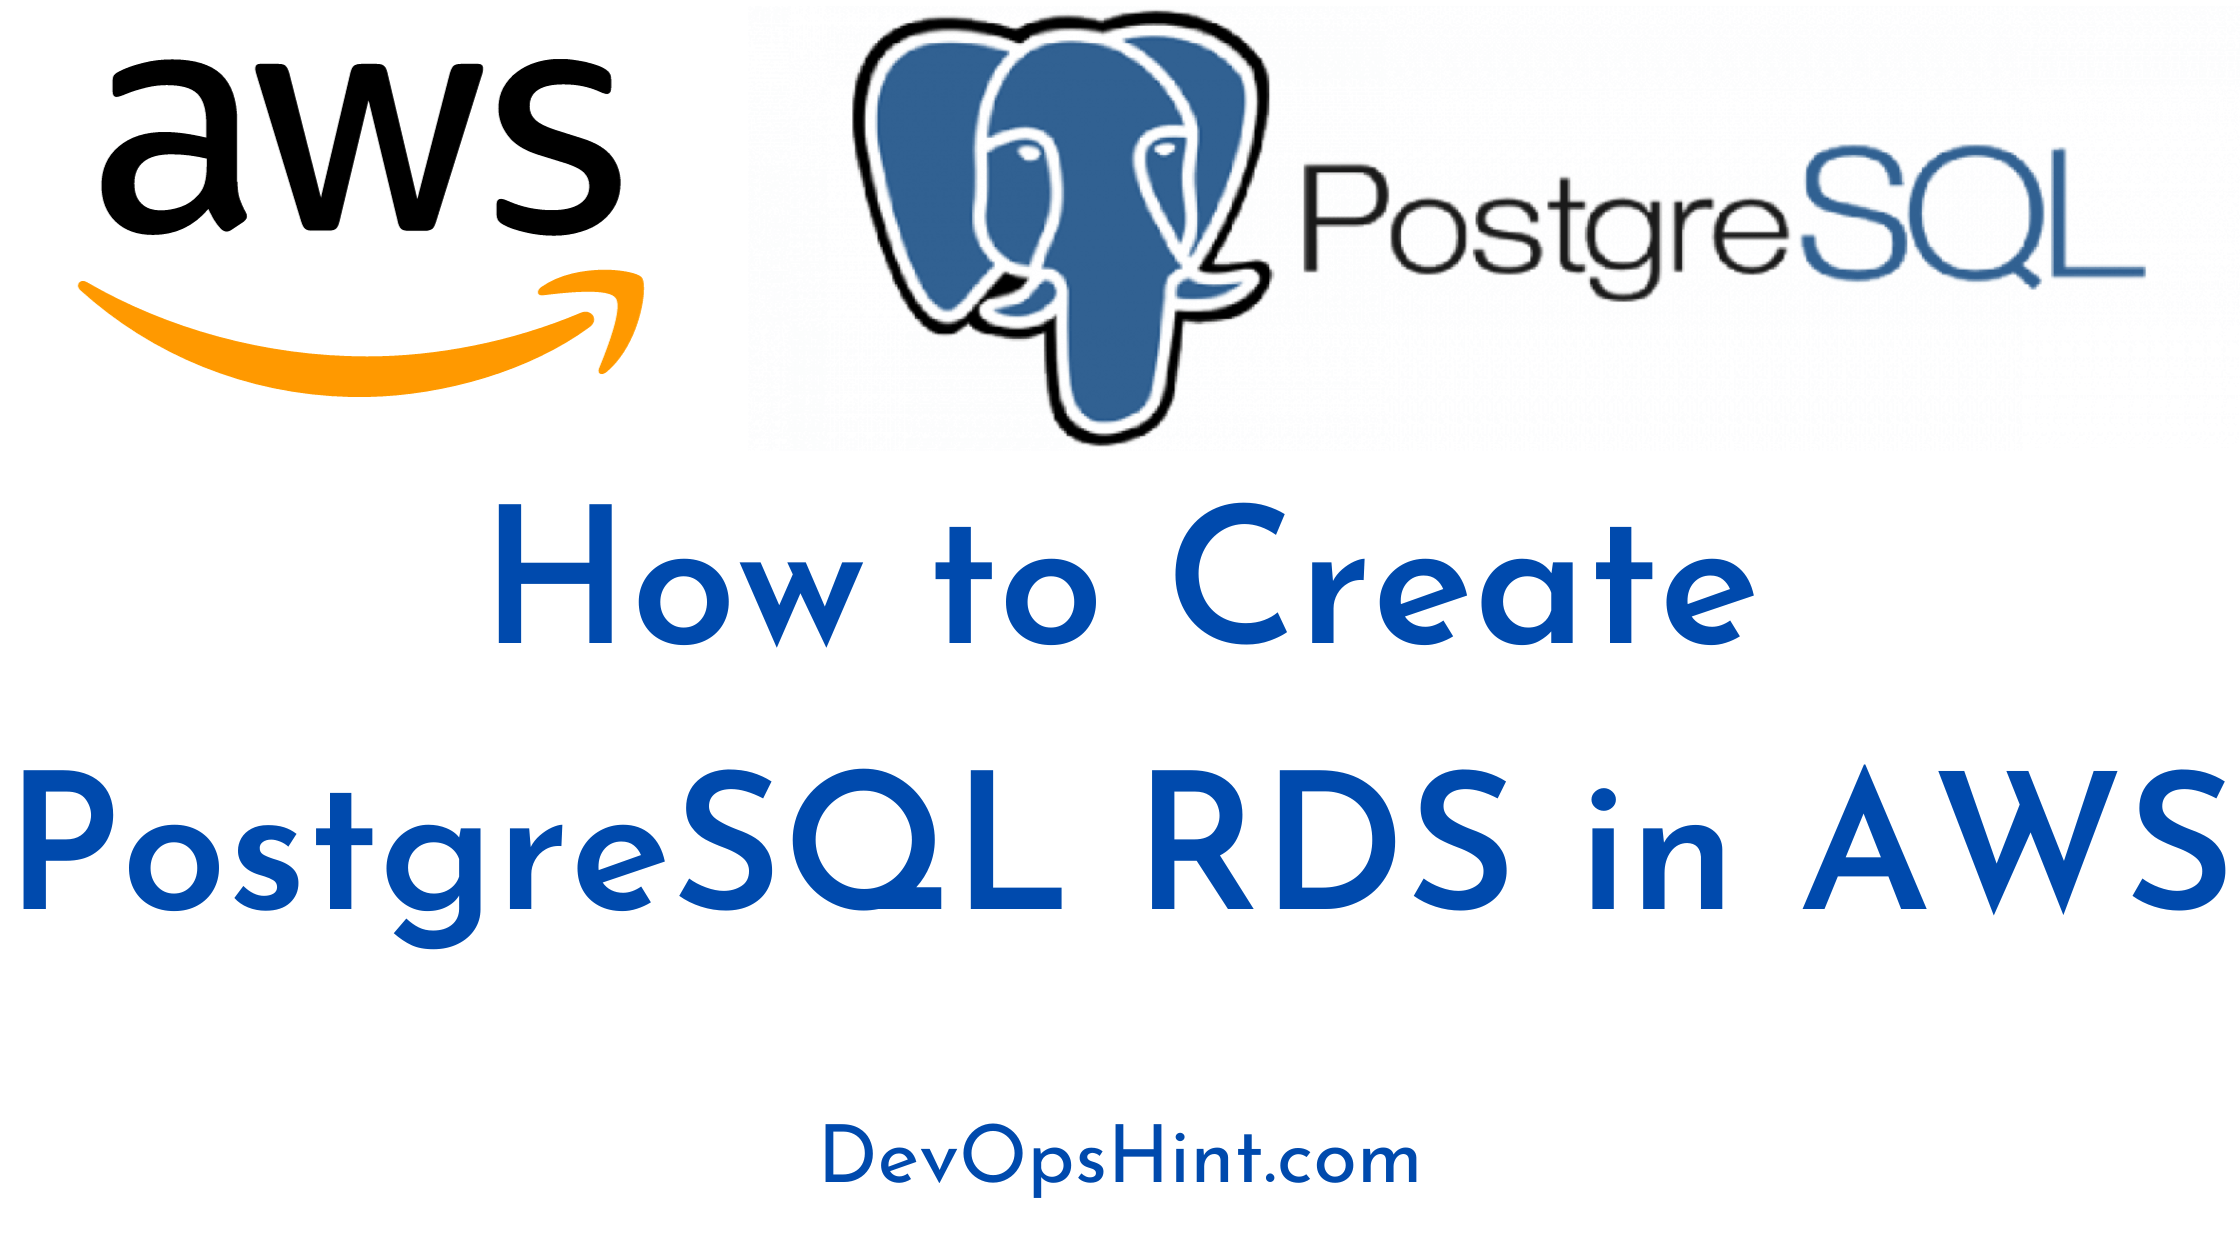 How to Create PostgreSQL RDS in AWS